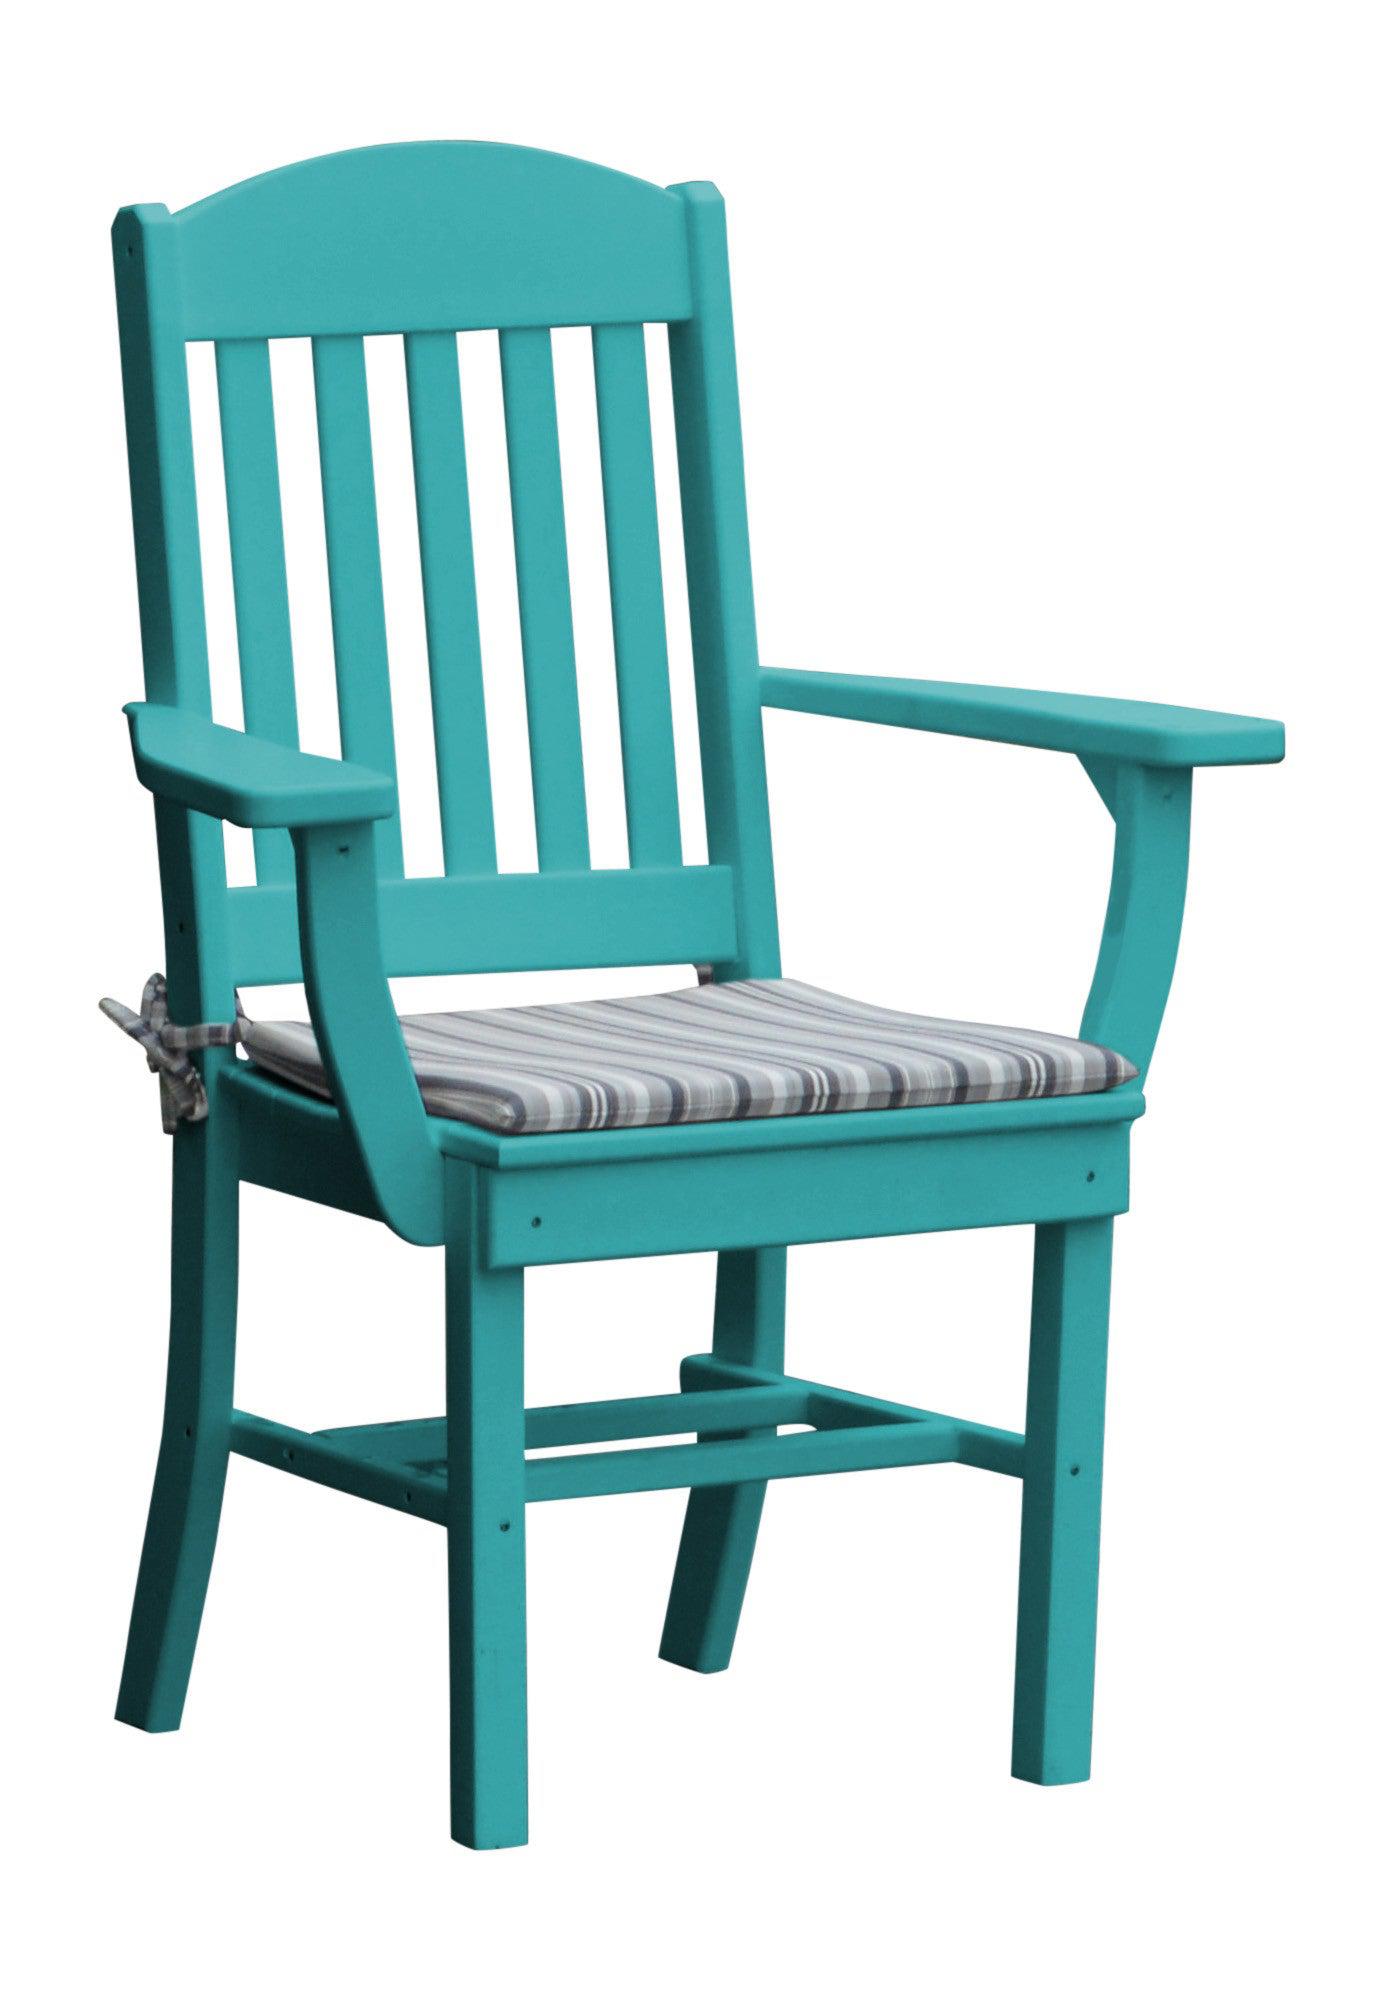 A&L Furniture Company Recycled Plastic Classic Dining Chair w/ Arms - Aruba Blue